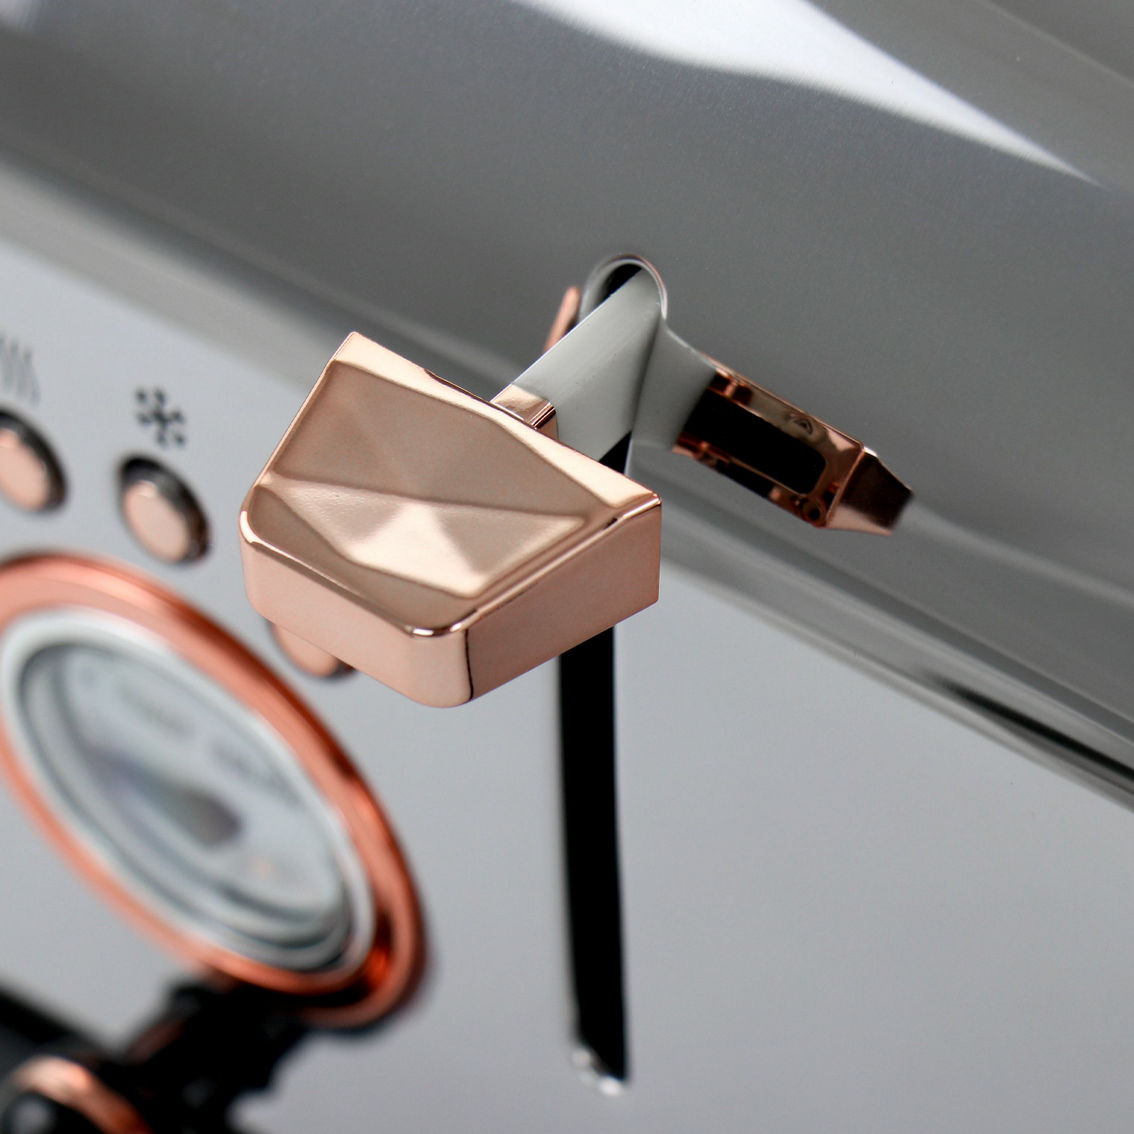 MegaChef 4 Slice Wide Slot Toaster with Variable Browning in Black and Rose Gold - Image 5 of 5